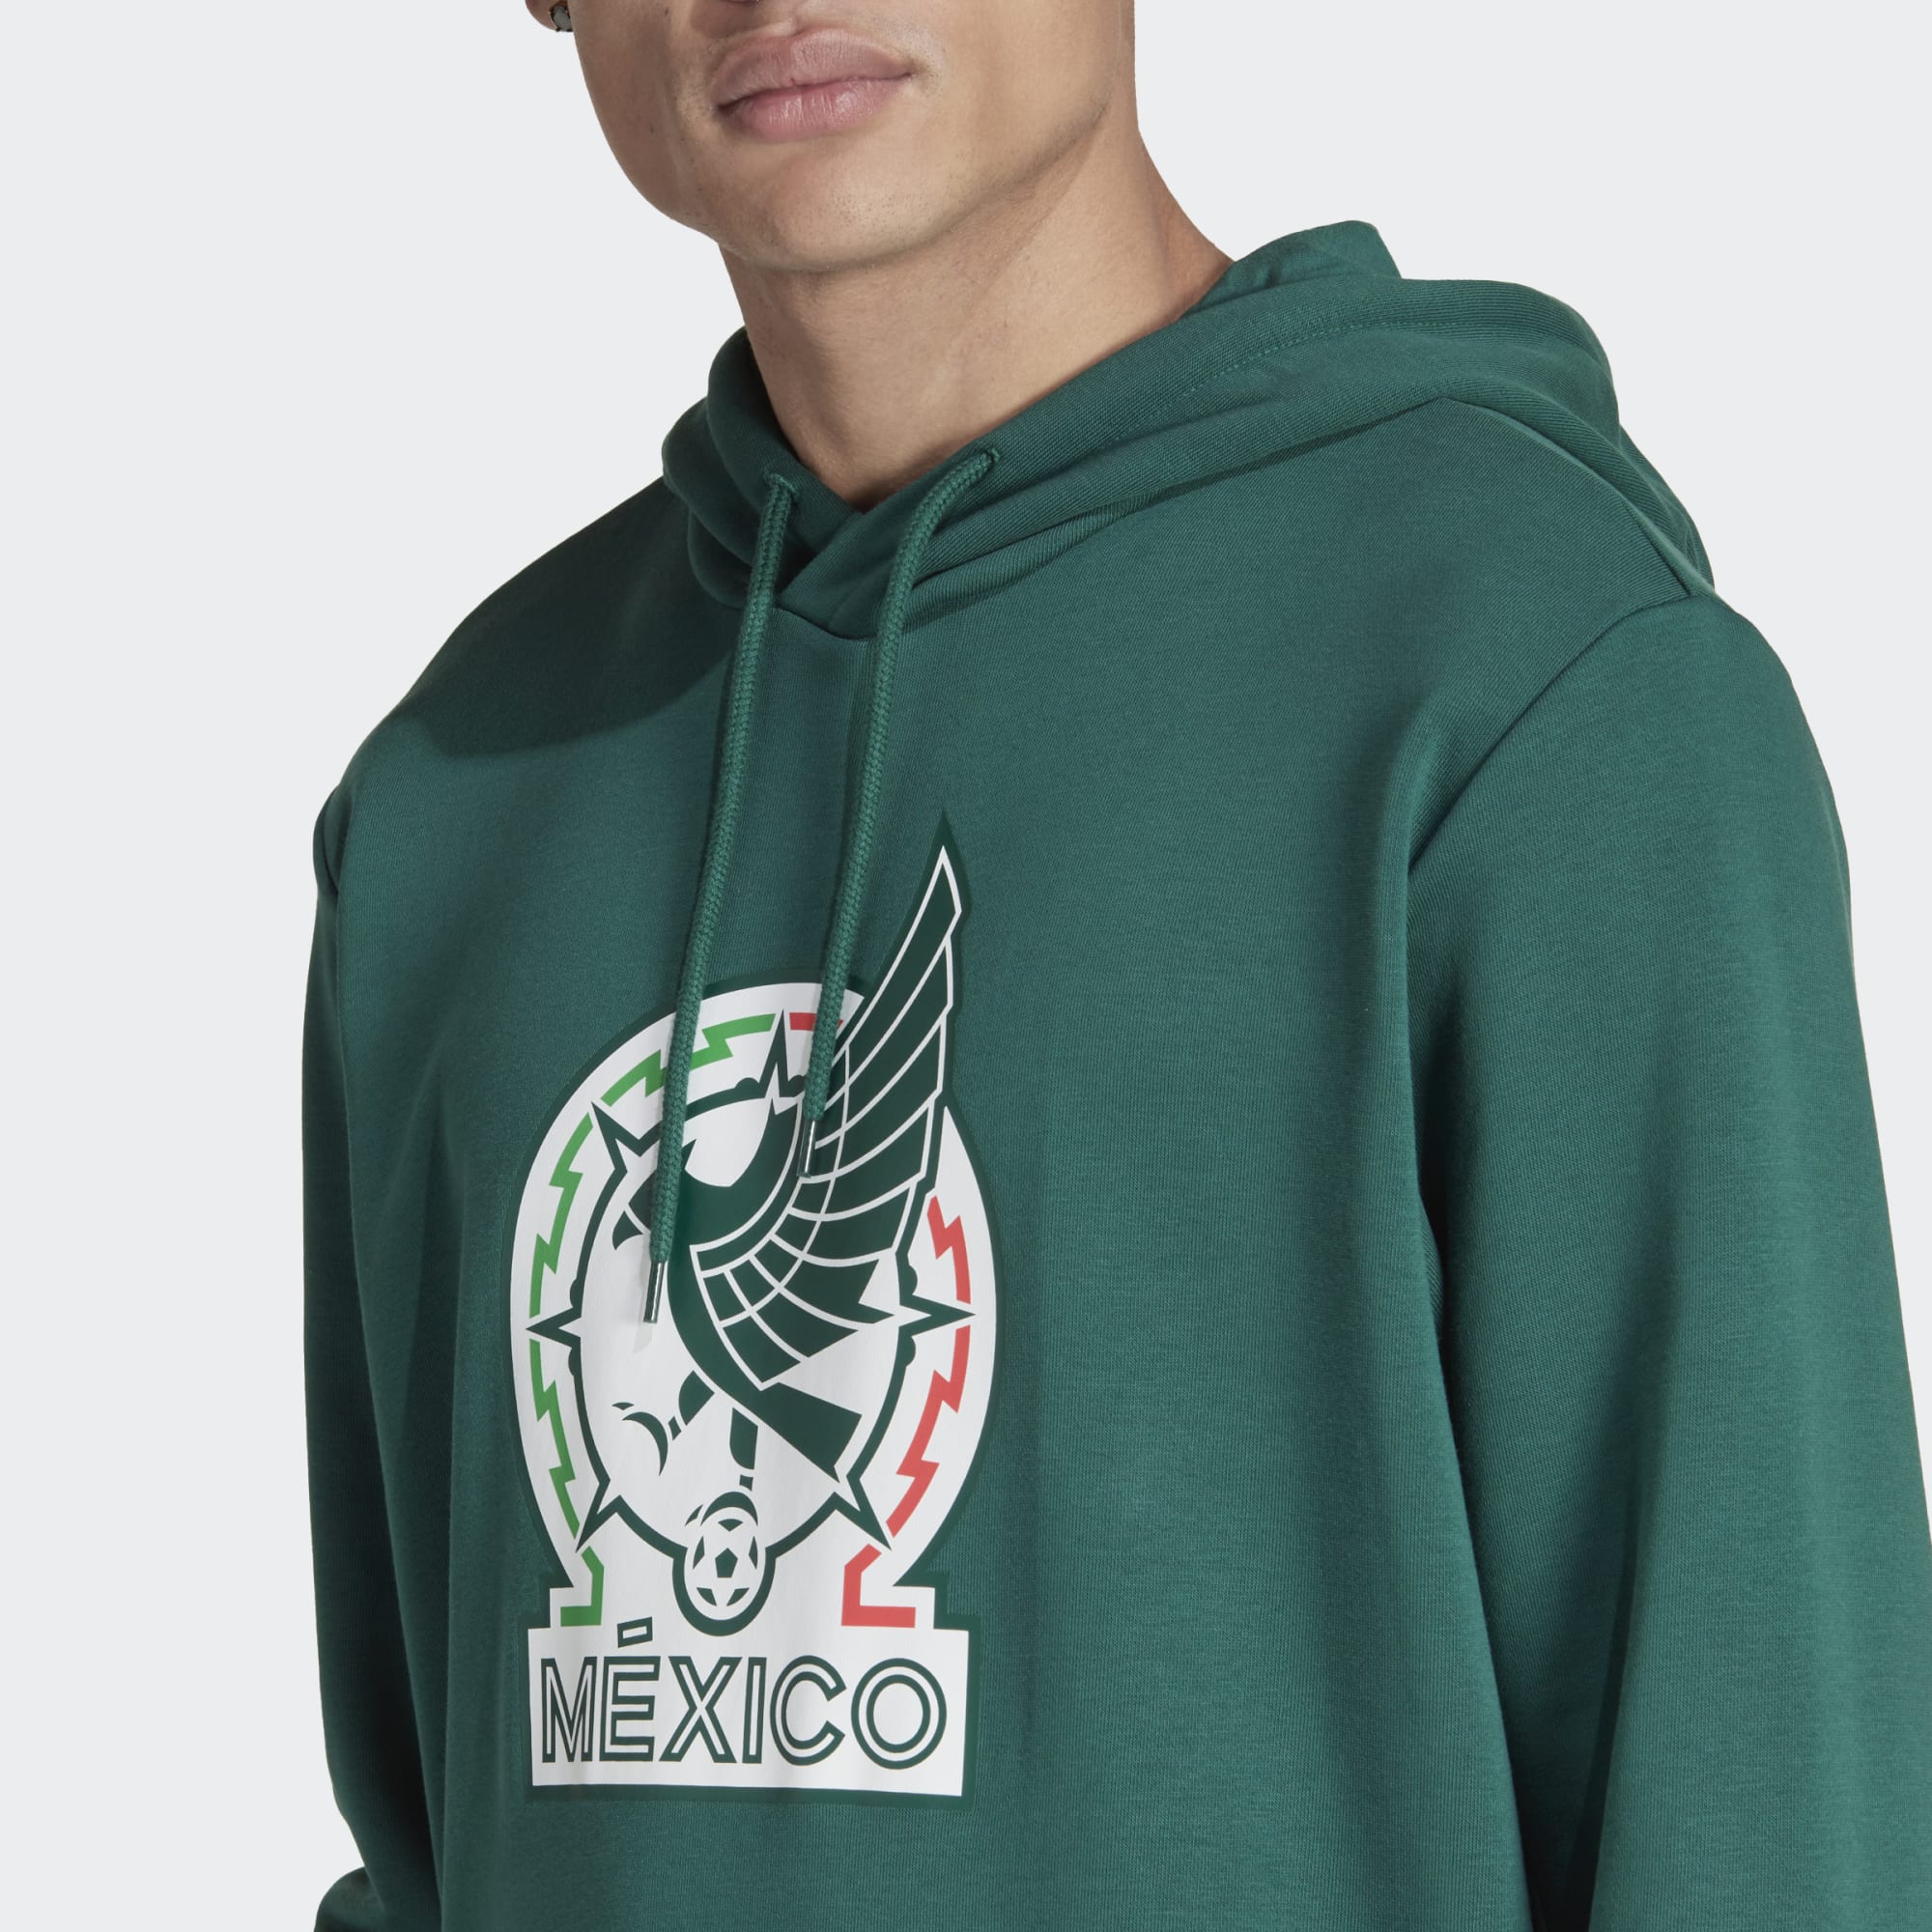 stefanssoccer.com:adidas Mexico DNA Graphic Hoodie - Green